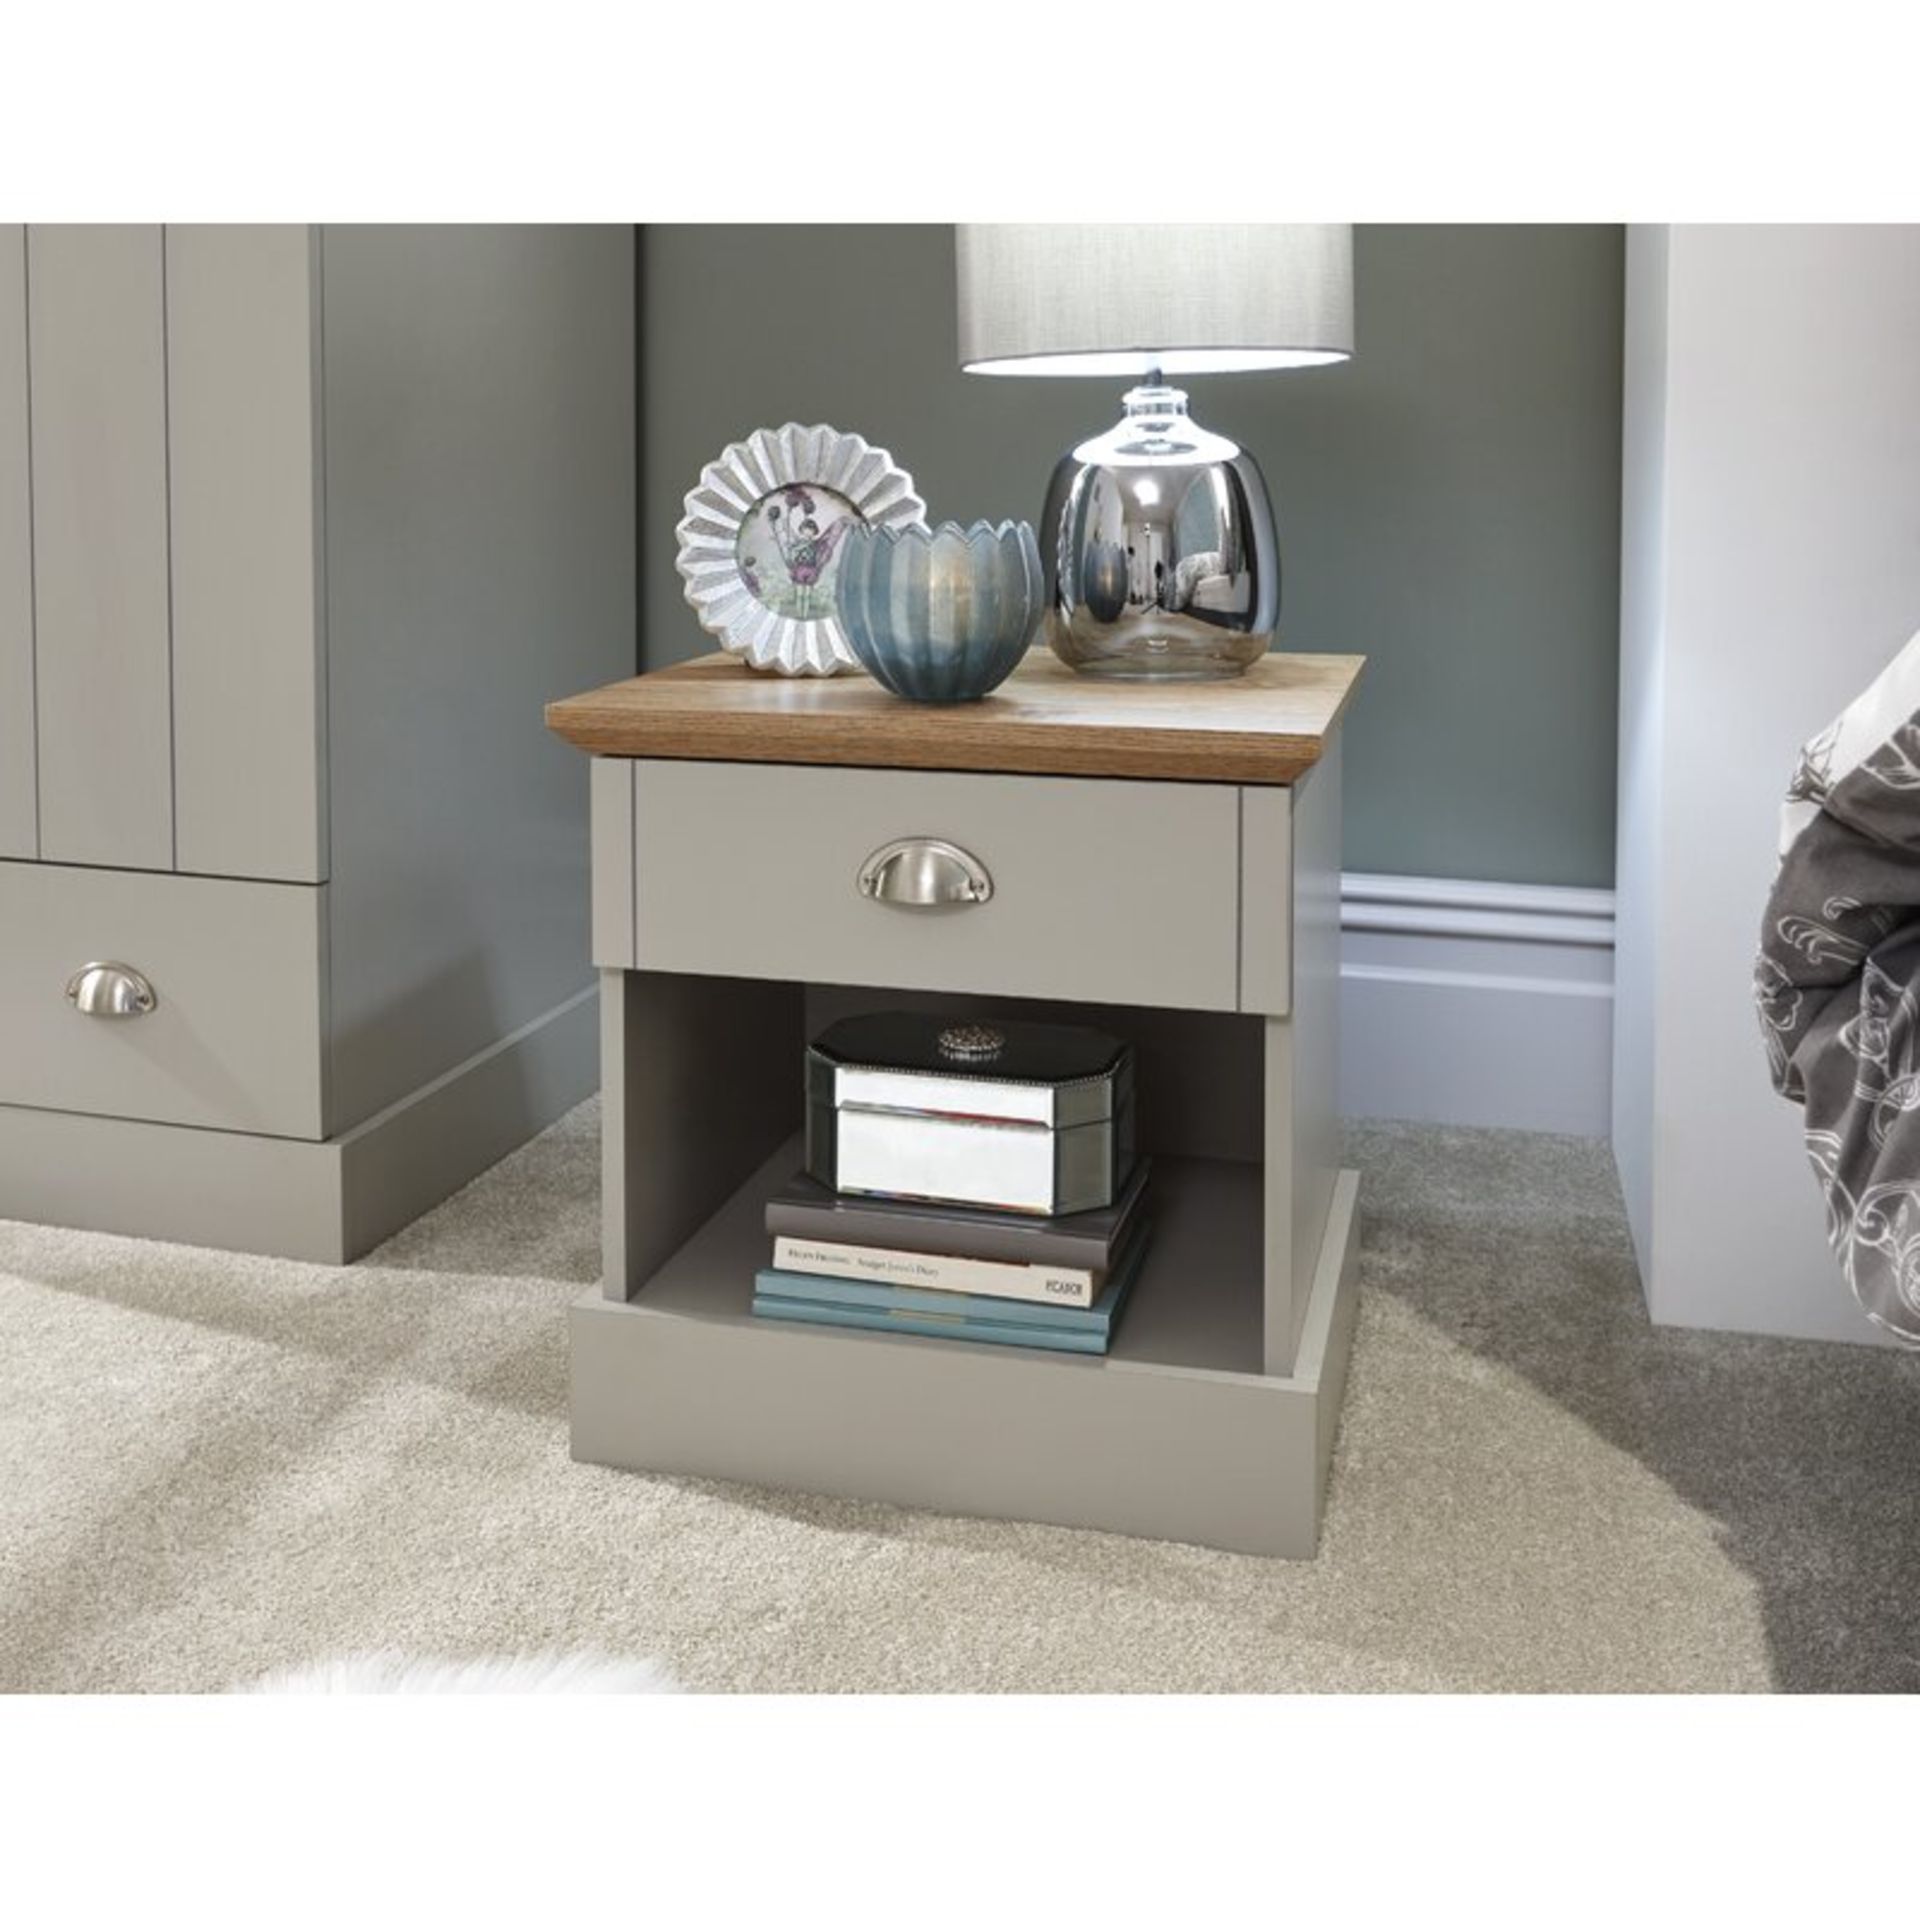 Chapin 1 Drawer Bedside Table - RRP £77.99